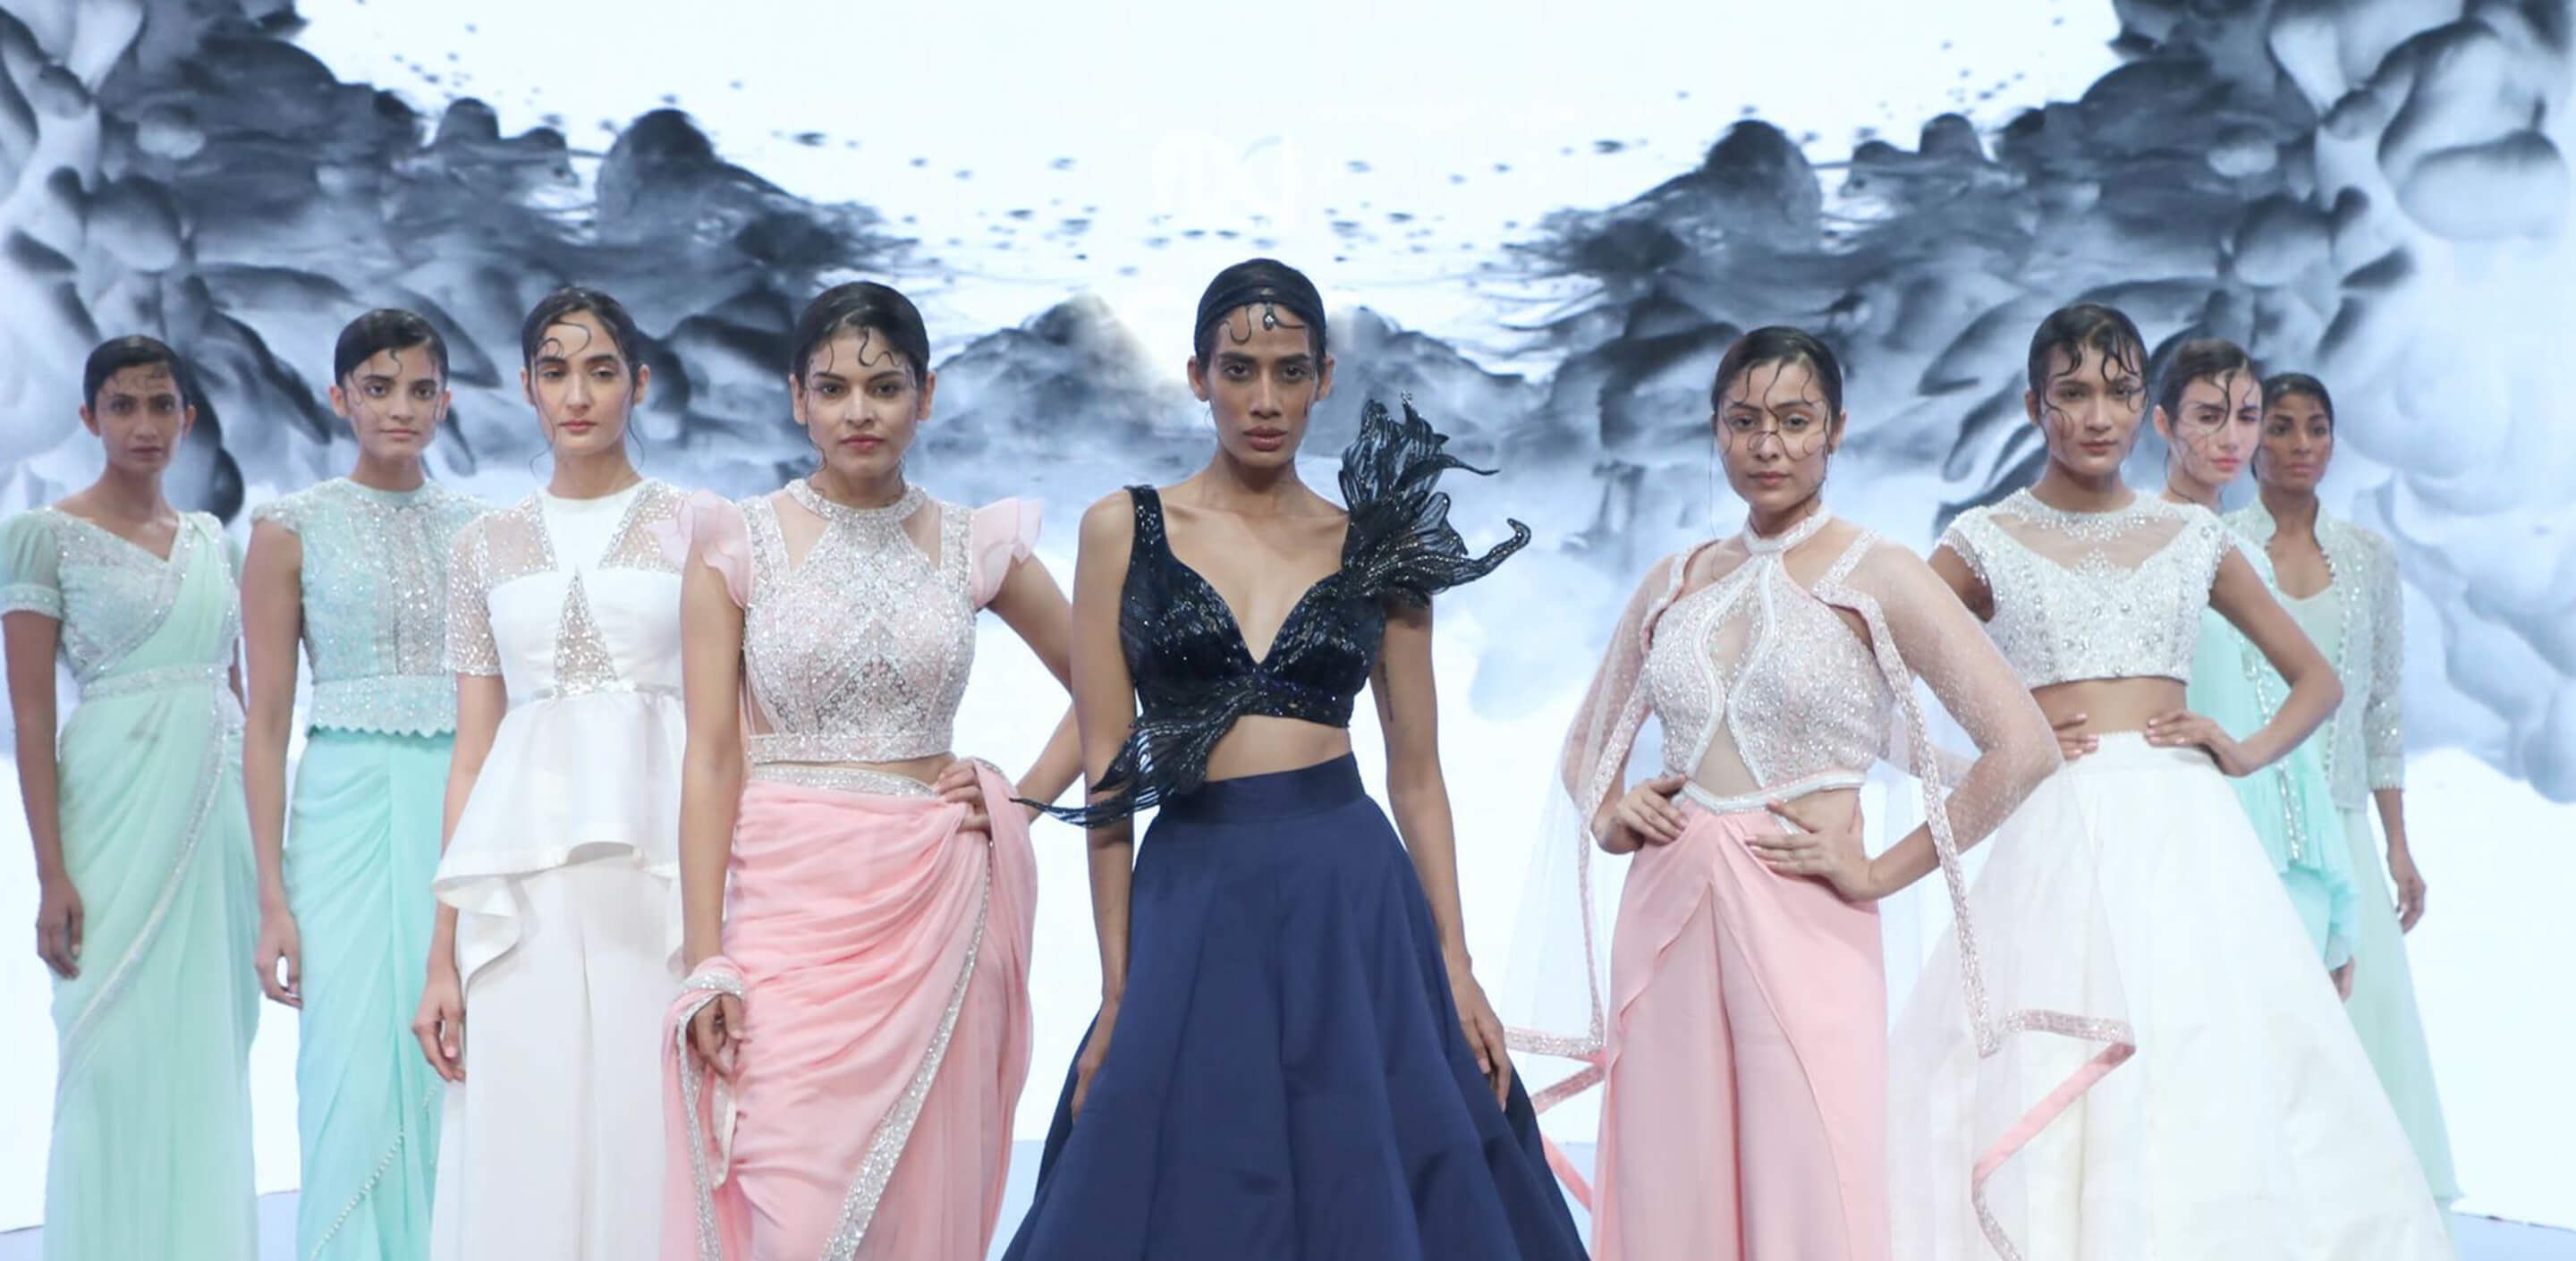 Why do fashion models wear illogical, insensible, and funny clothes on ramp  walks? - Quora